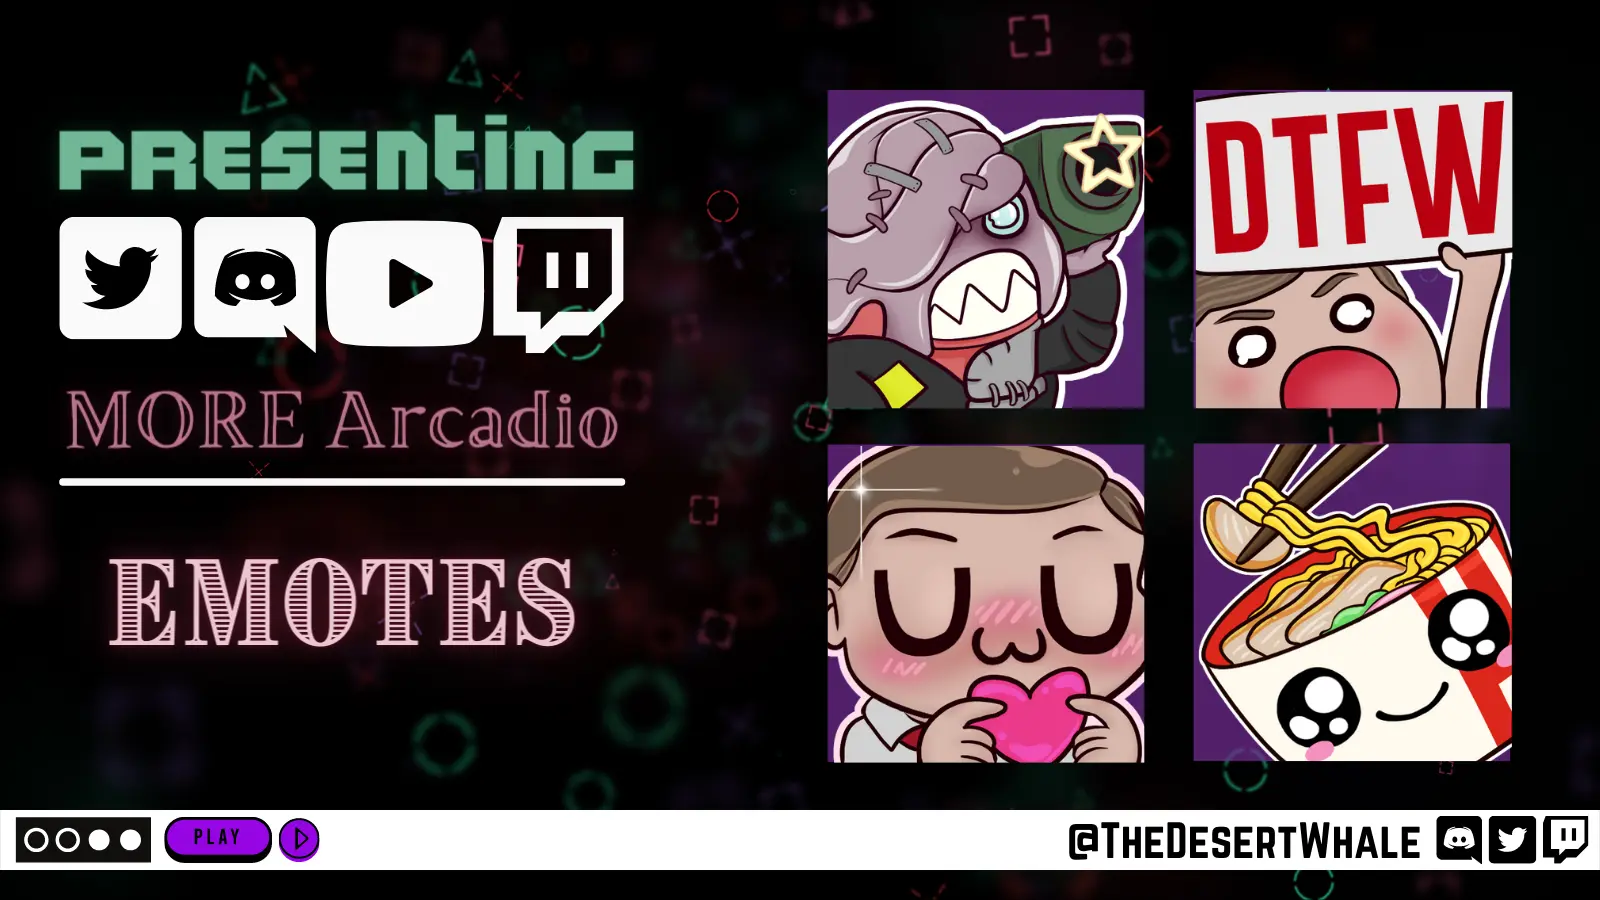 Another set of emotes for Arcadio